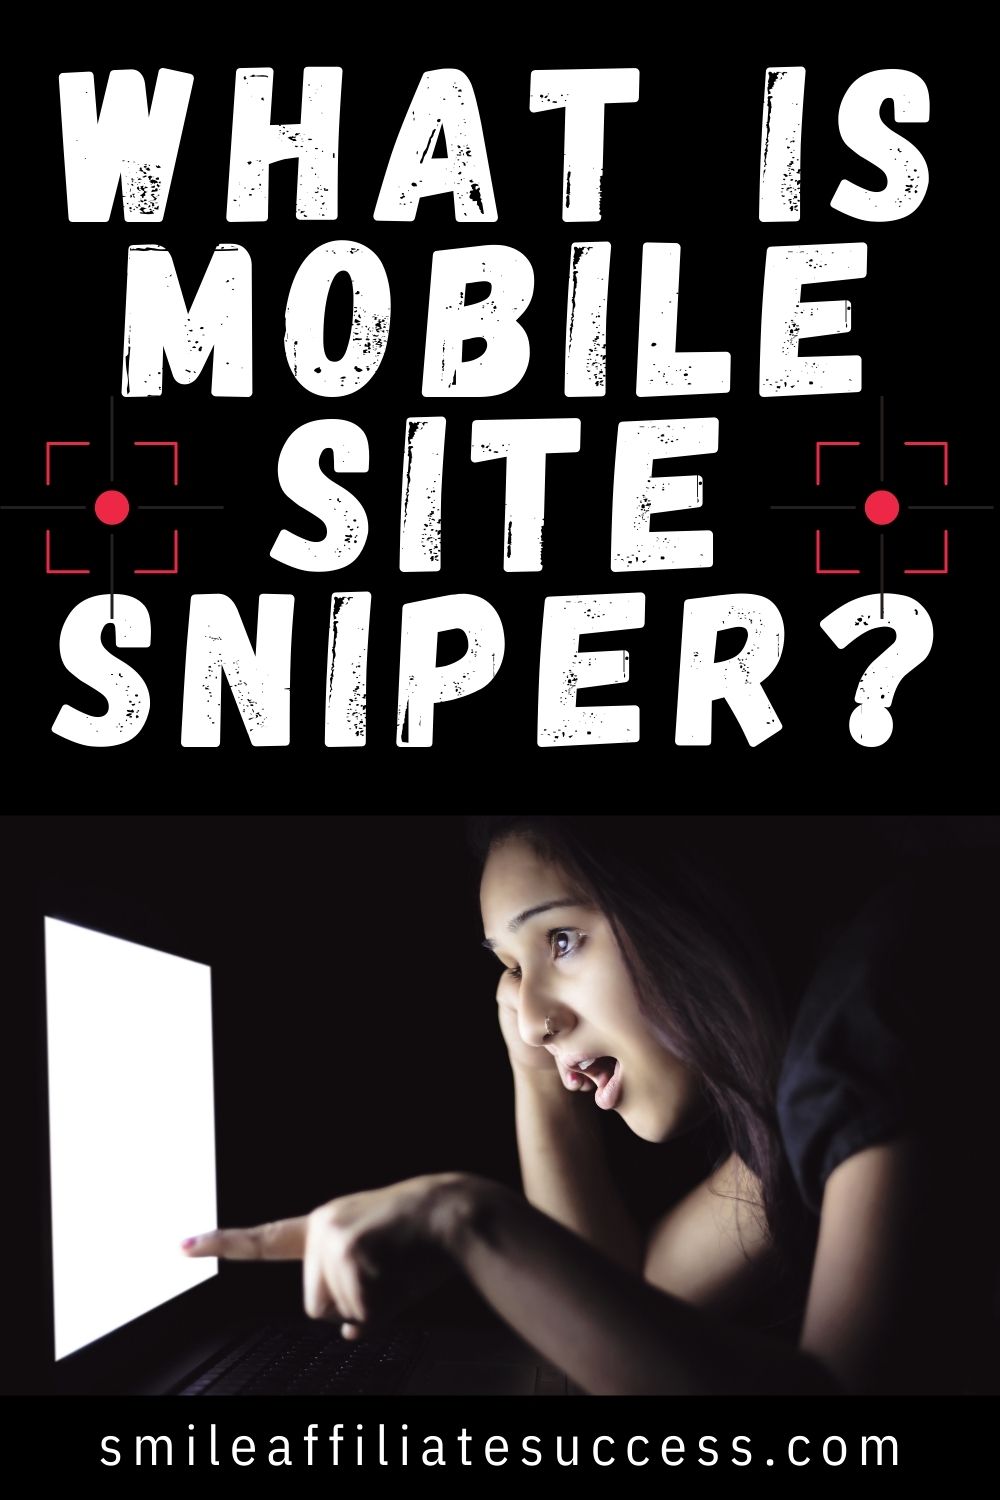 What Is Mobile Site Sniper?